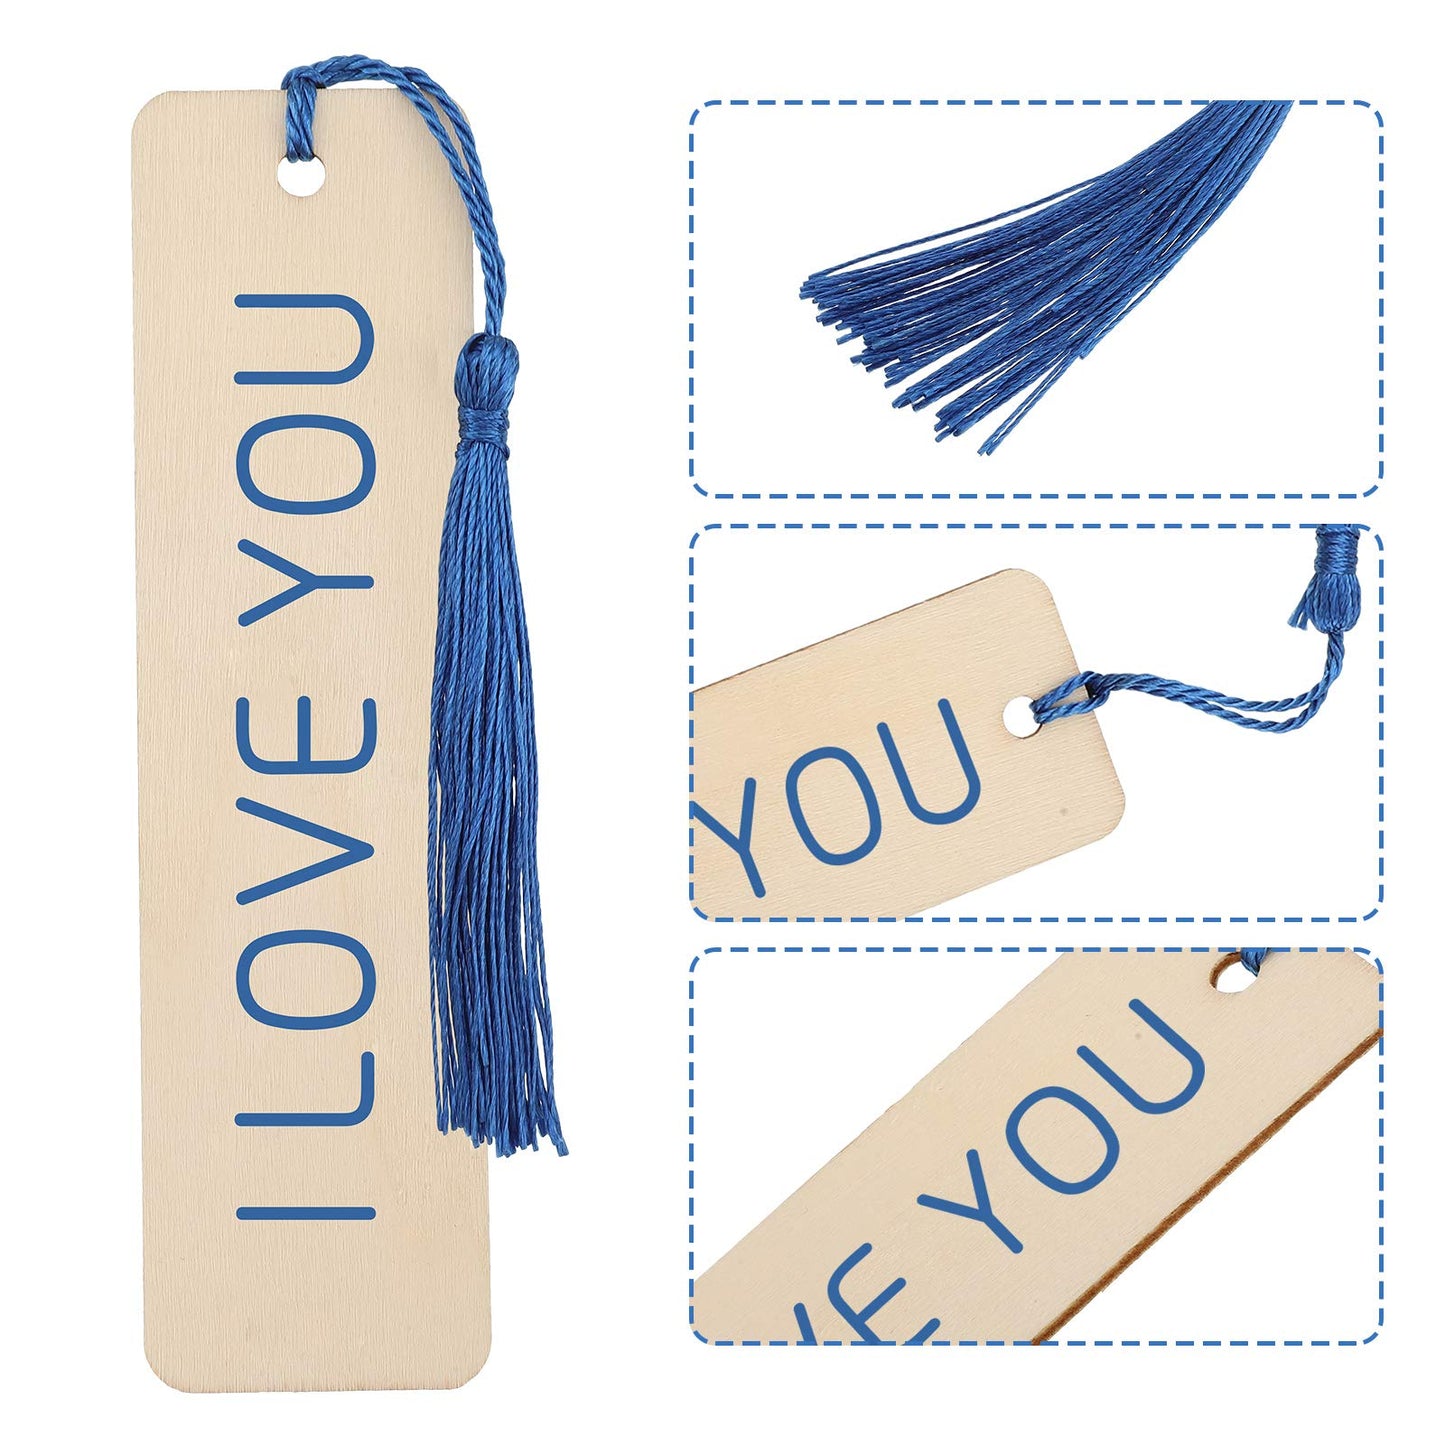 36 Pieces Wood Bookmark Bulk Blank Bookmarks with 36 Pieces 6 Colors Tassels, Wooden Book Markers Rectangle Thin Hanging Tag with Holes for DIY